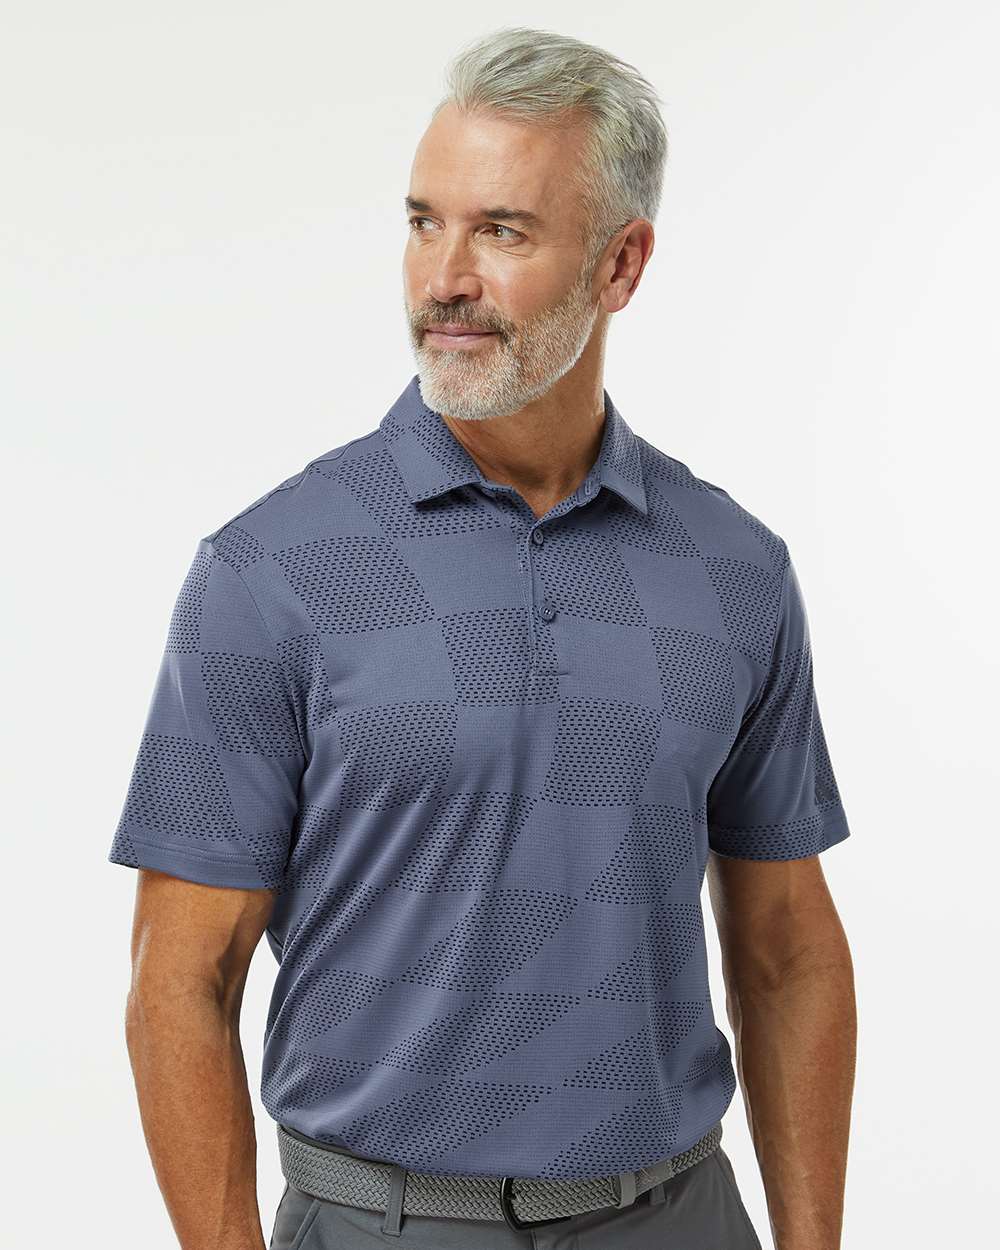 Adidas Men's Ultimate365 Textured Polo